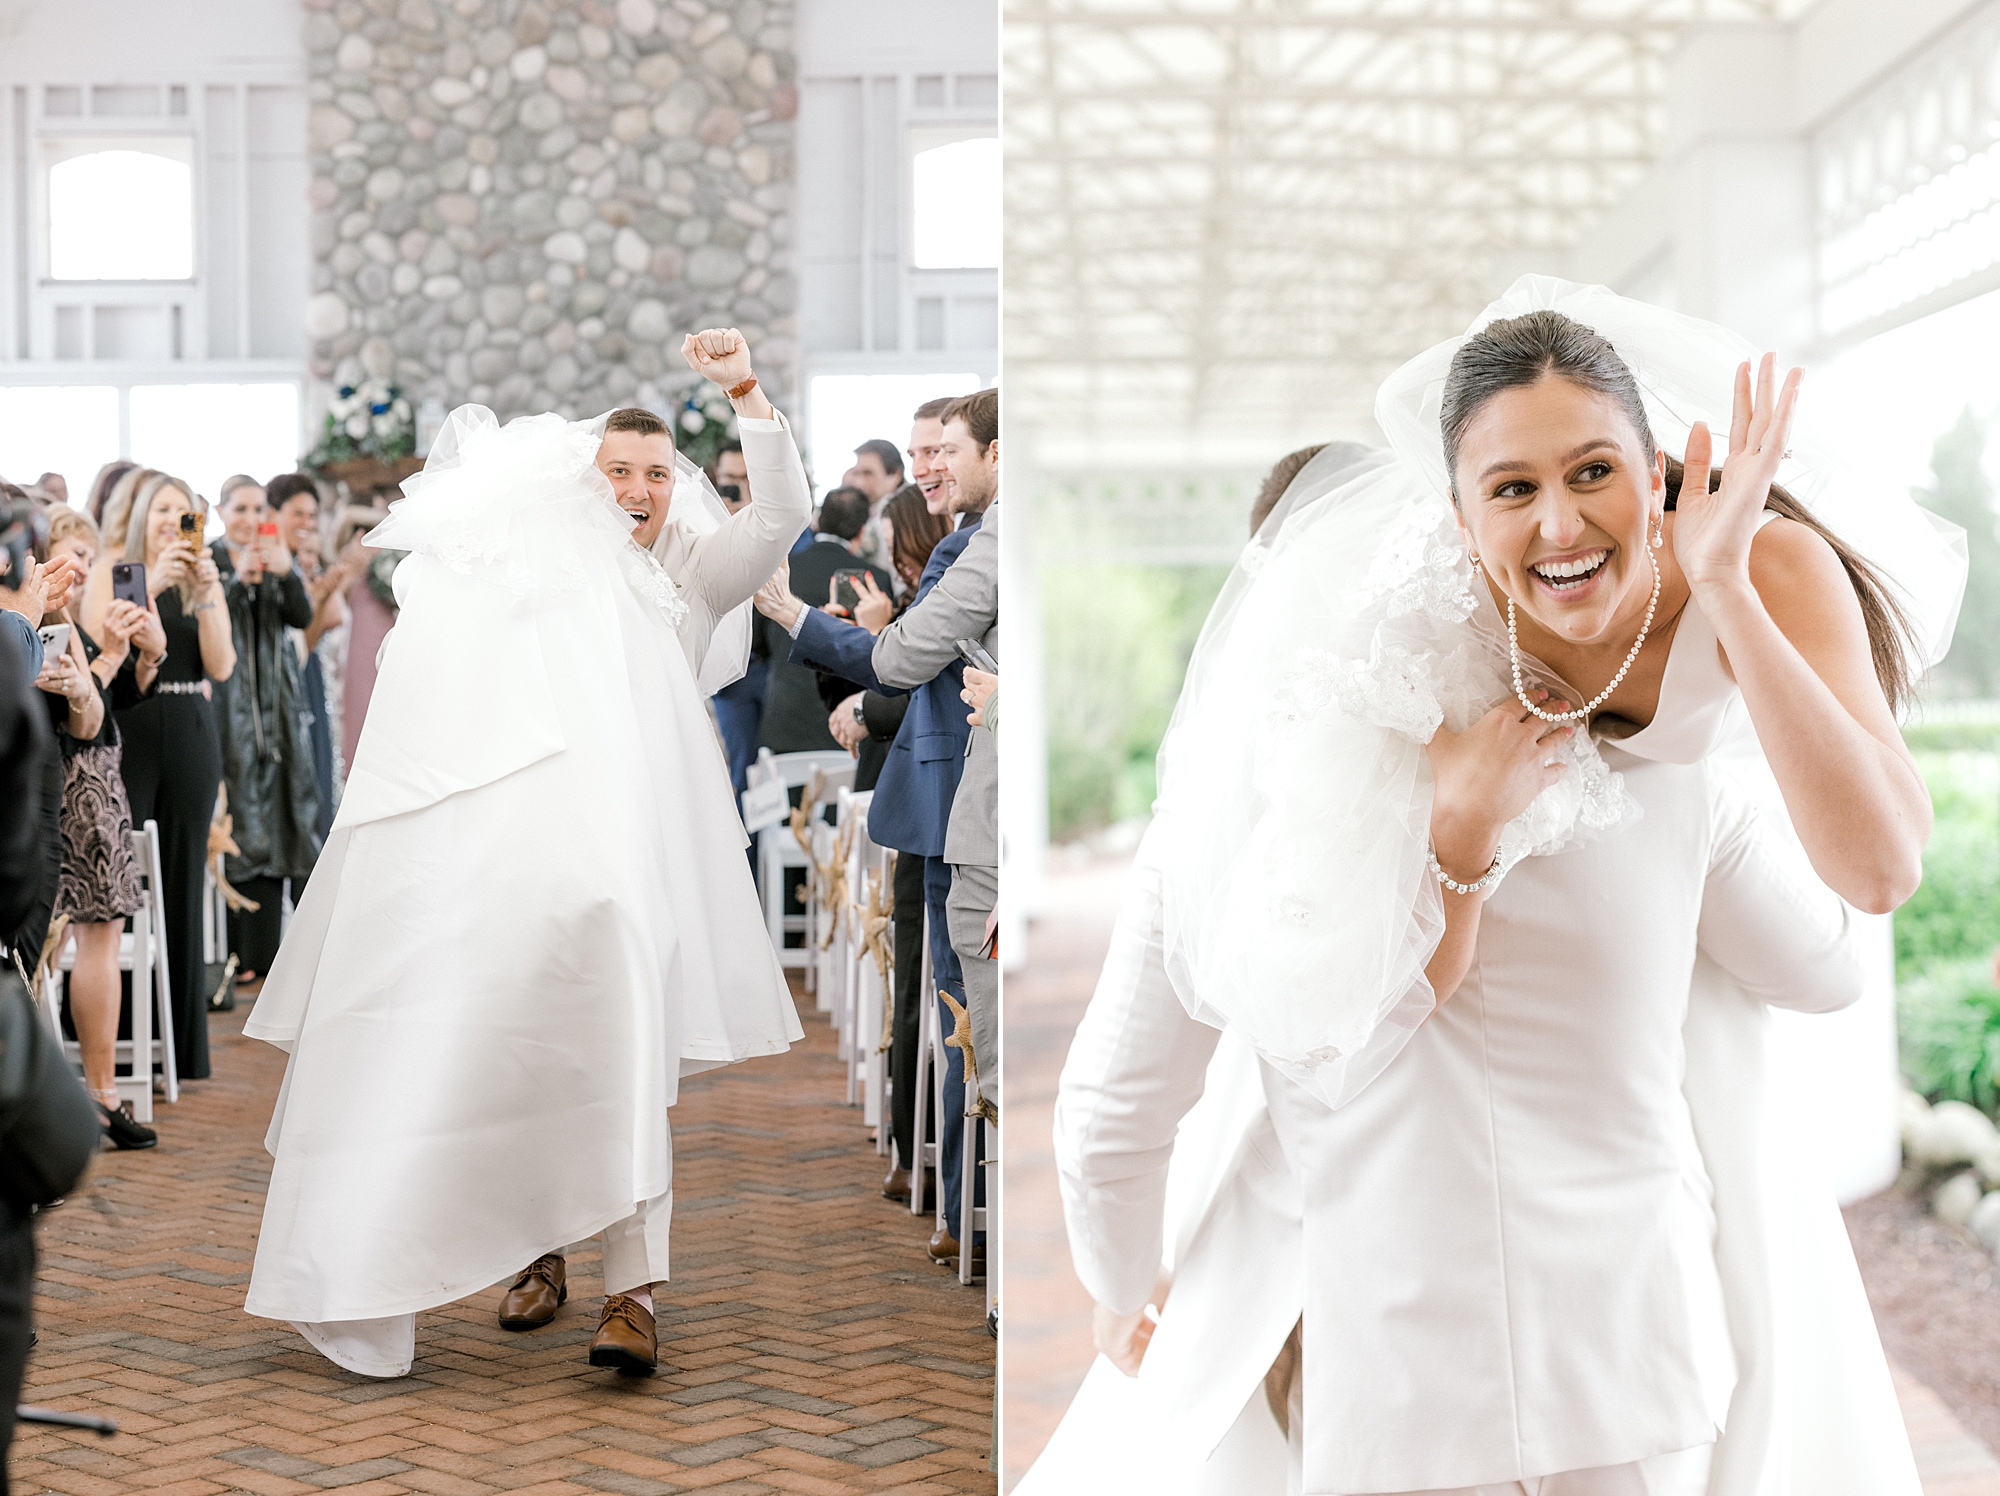 groom carries bride up aisle after wedding ceremony